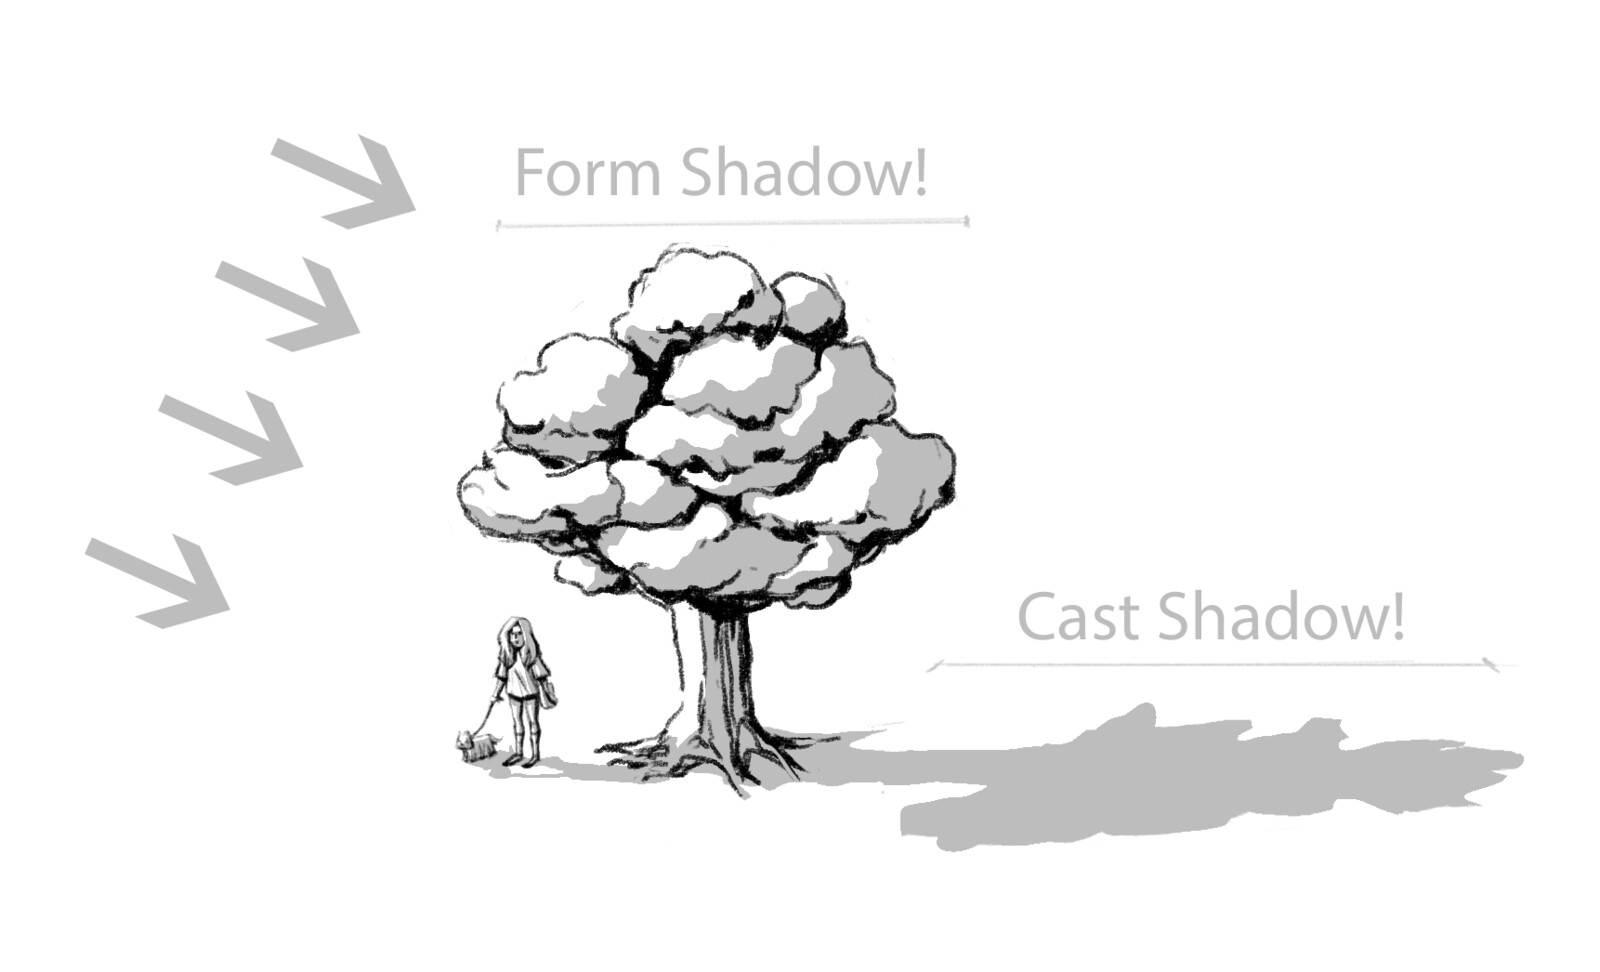 'The first is the Form shadow, a shadow that wraps around the object/character/building on the un-lit side. A cast shadow is a shadow that any of the aforementioned subjects cast onto the ground.'